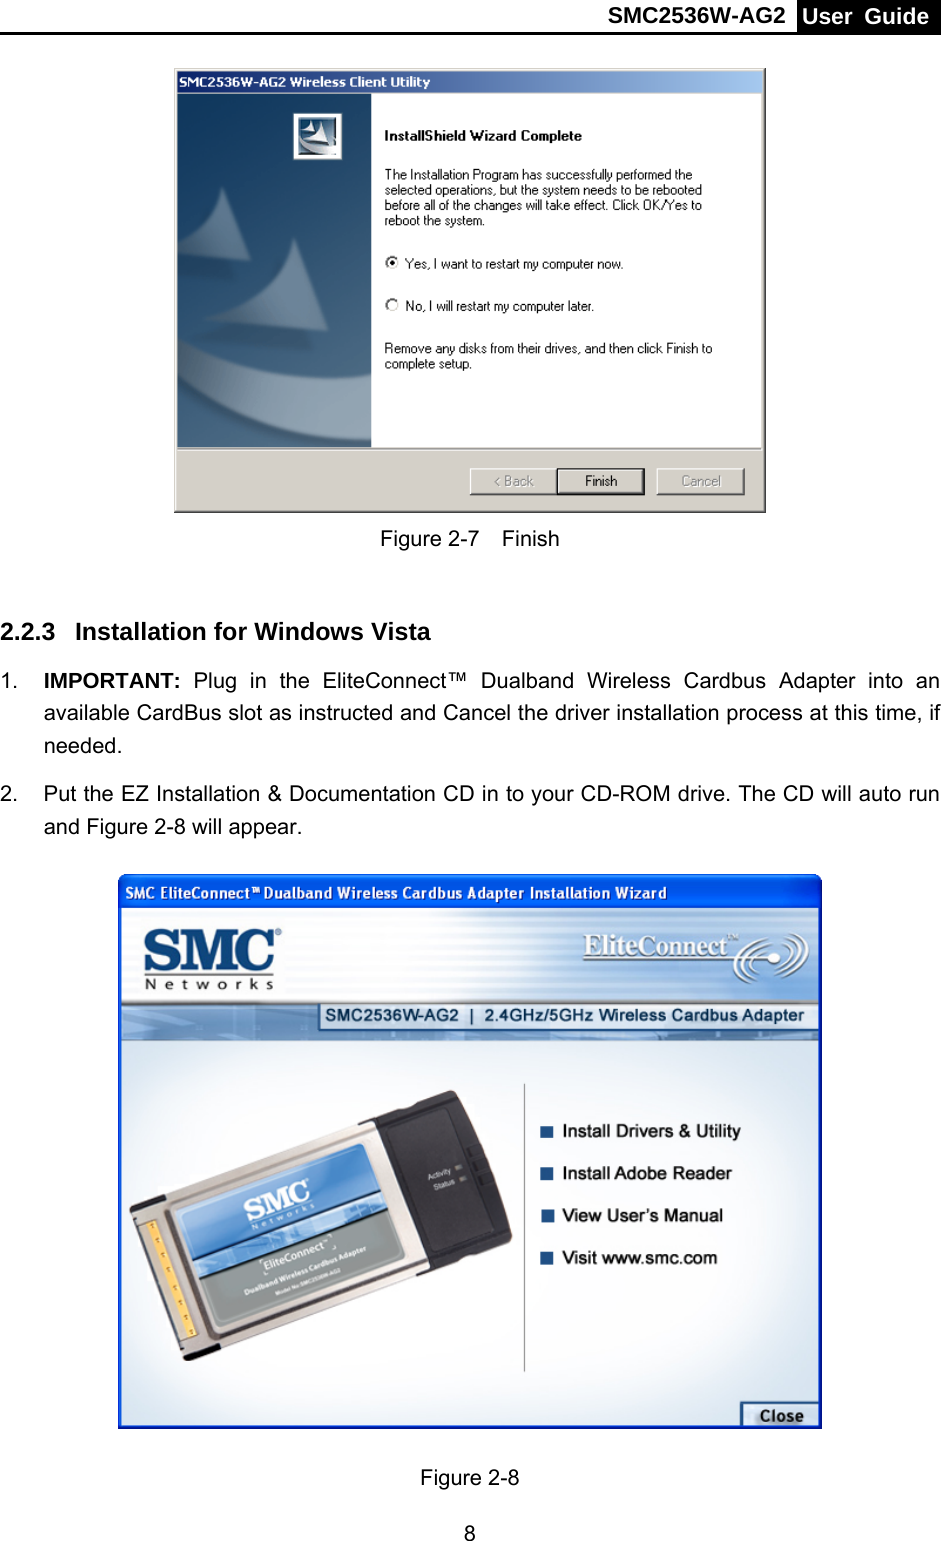 SMC2536W-AG2  User Guide   8 Figure 2-7  Finish  2.2.3  Installation for Windows Vista 1.  IMPORTANT:  Plug in the EliteConnect™ Dualband Wireless Cardbus Adapter into an available CardBus slot as instructed and Cancel the driver installation process at this time, if needed. 2.  Put the EZ Installation &amp; Documentation CD in to your CD-ROM drive. The CD will auto run and Figure 2-8 will appear.  Figure 2-8 